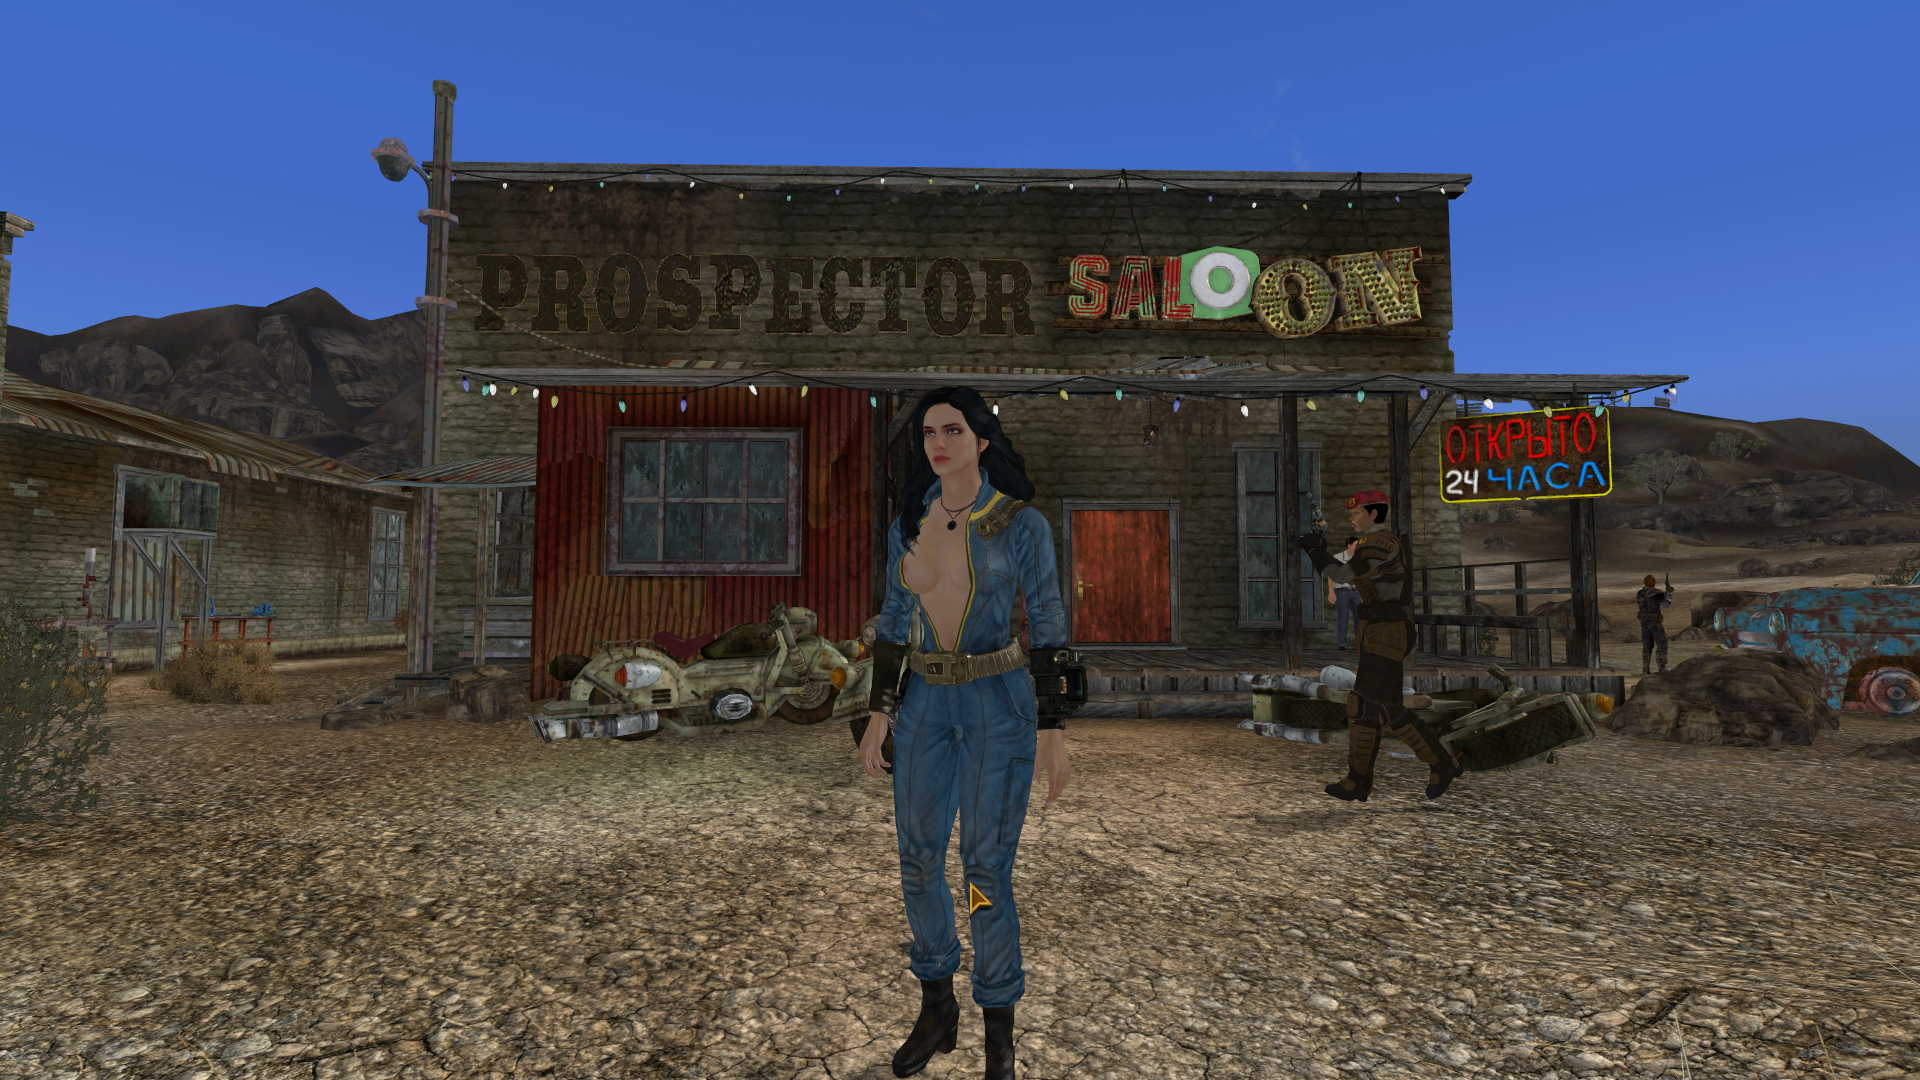 Sexout fallout new. Фоллаут Нью Вегас Sexout. Fallout New Vegas Sexout 5. Fallout New Vegas Sexout Breeder. Фоллаут Нью Вегас сексаут.